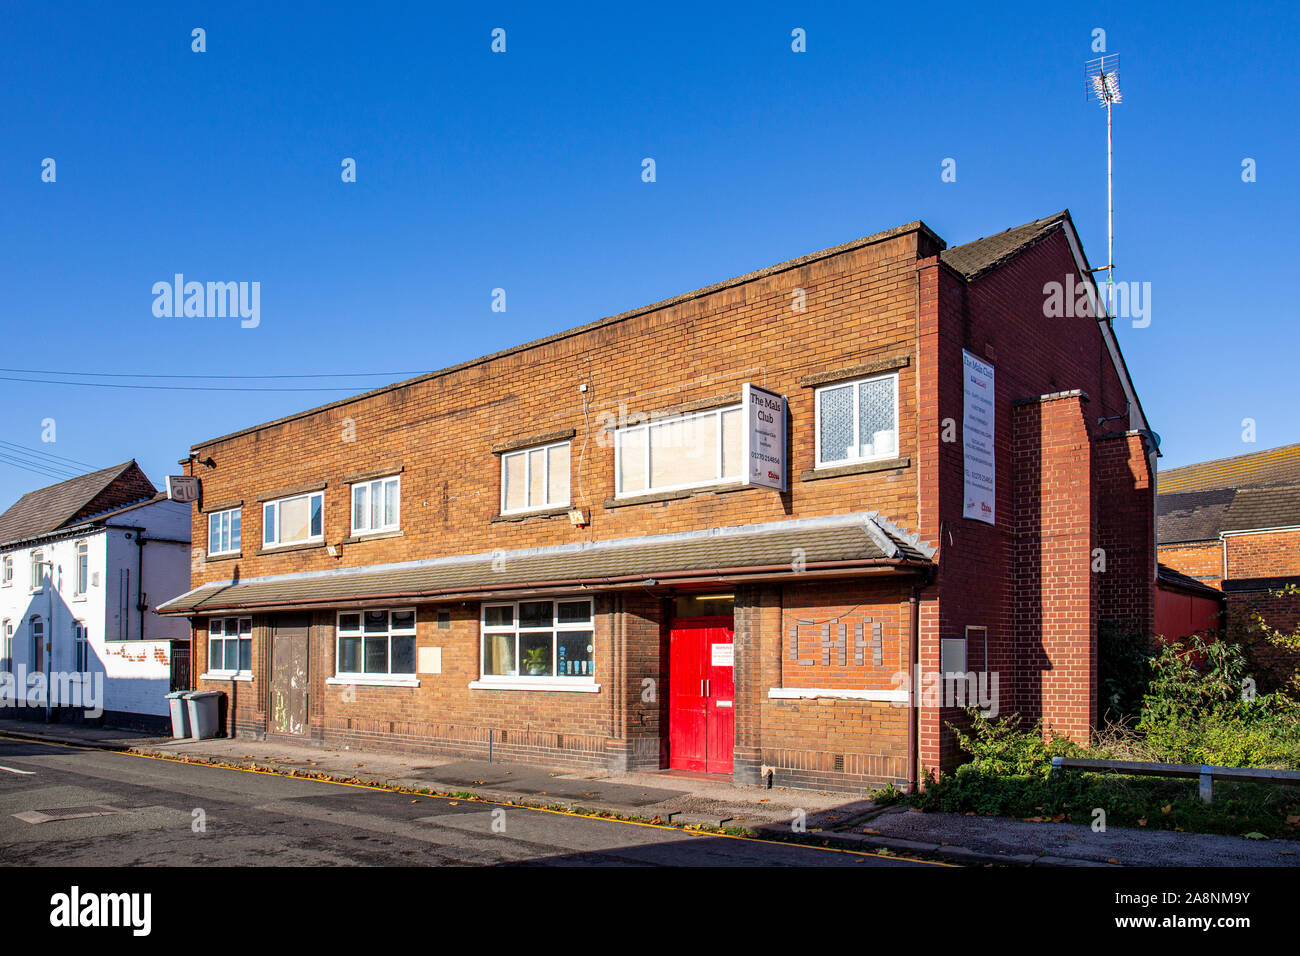 The Mals social club in Crewe Cheshire UK Stock Photo